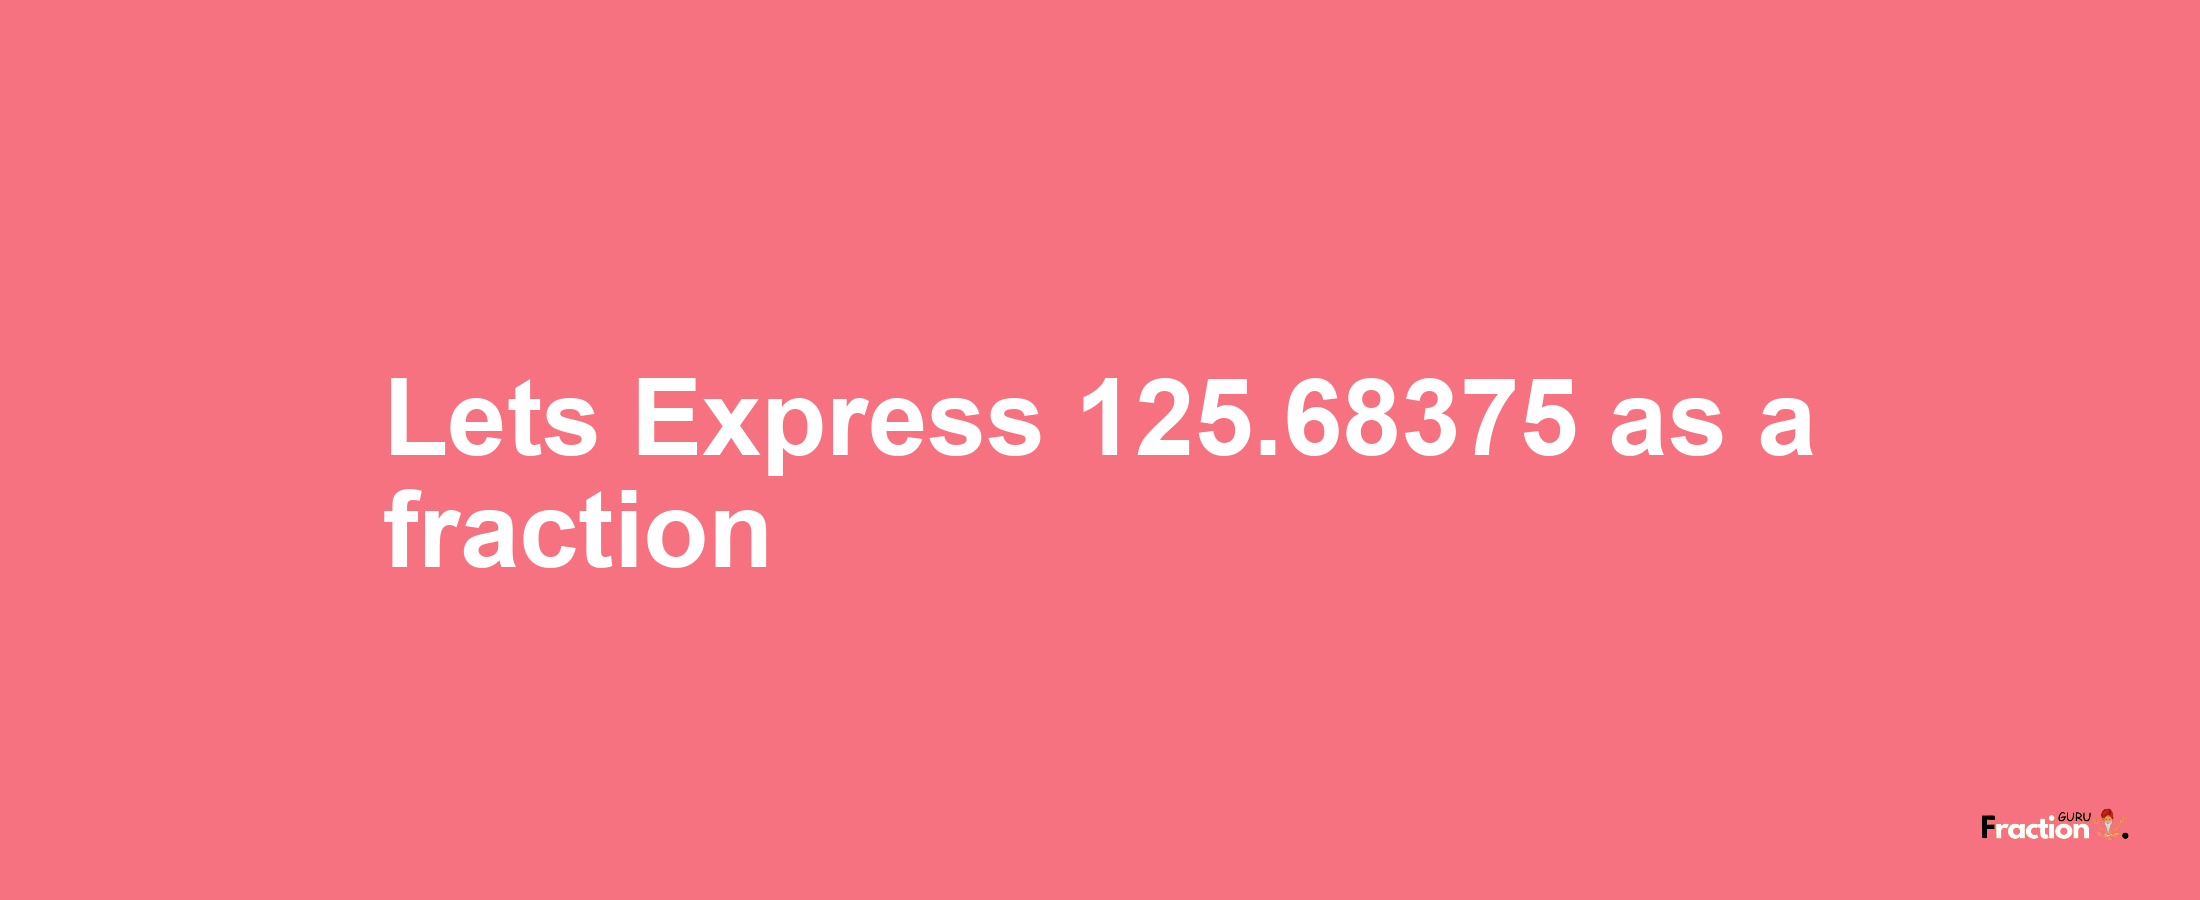 Lets Express 125.68375 as afraction